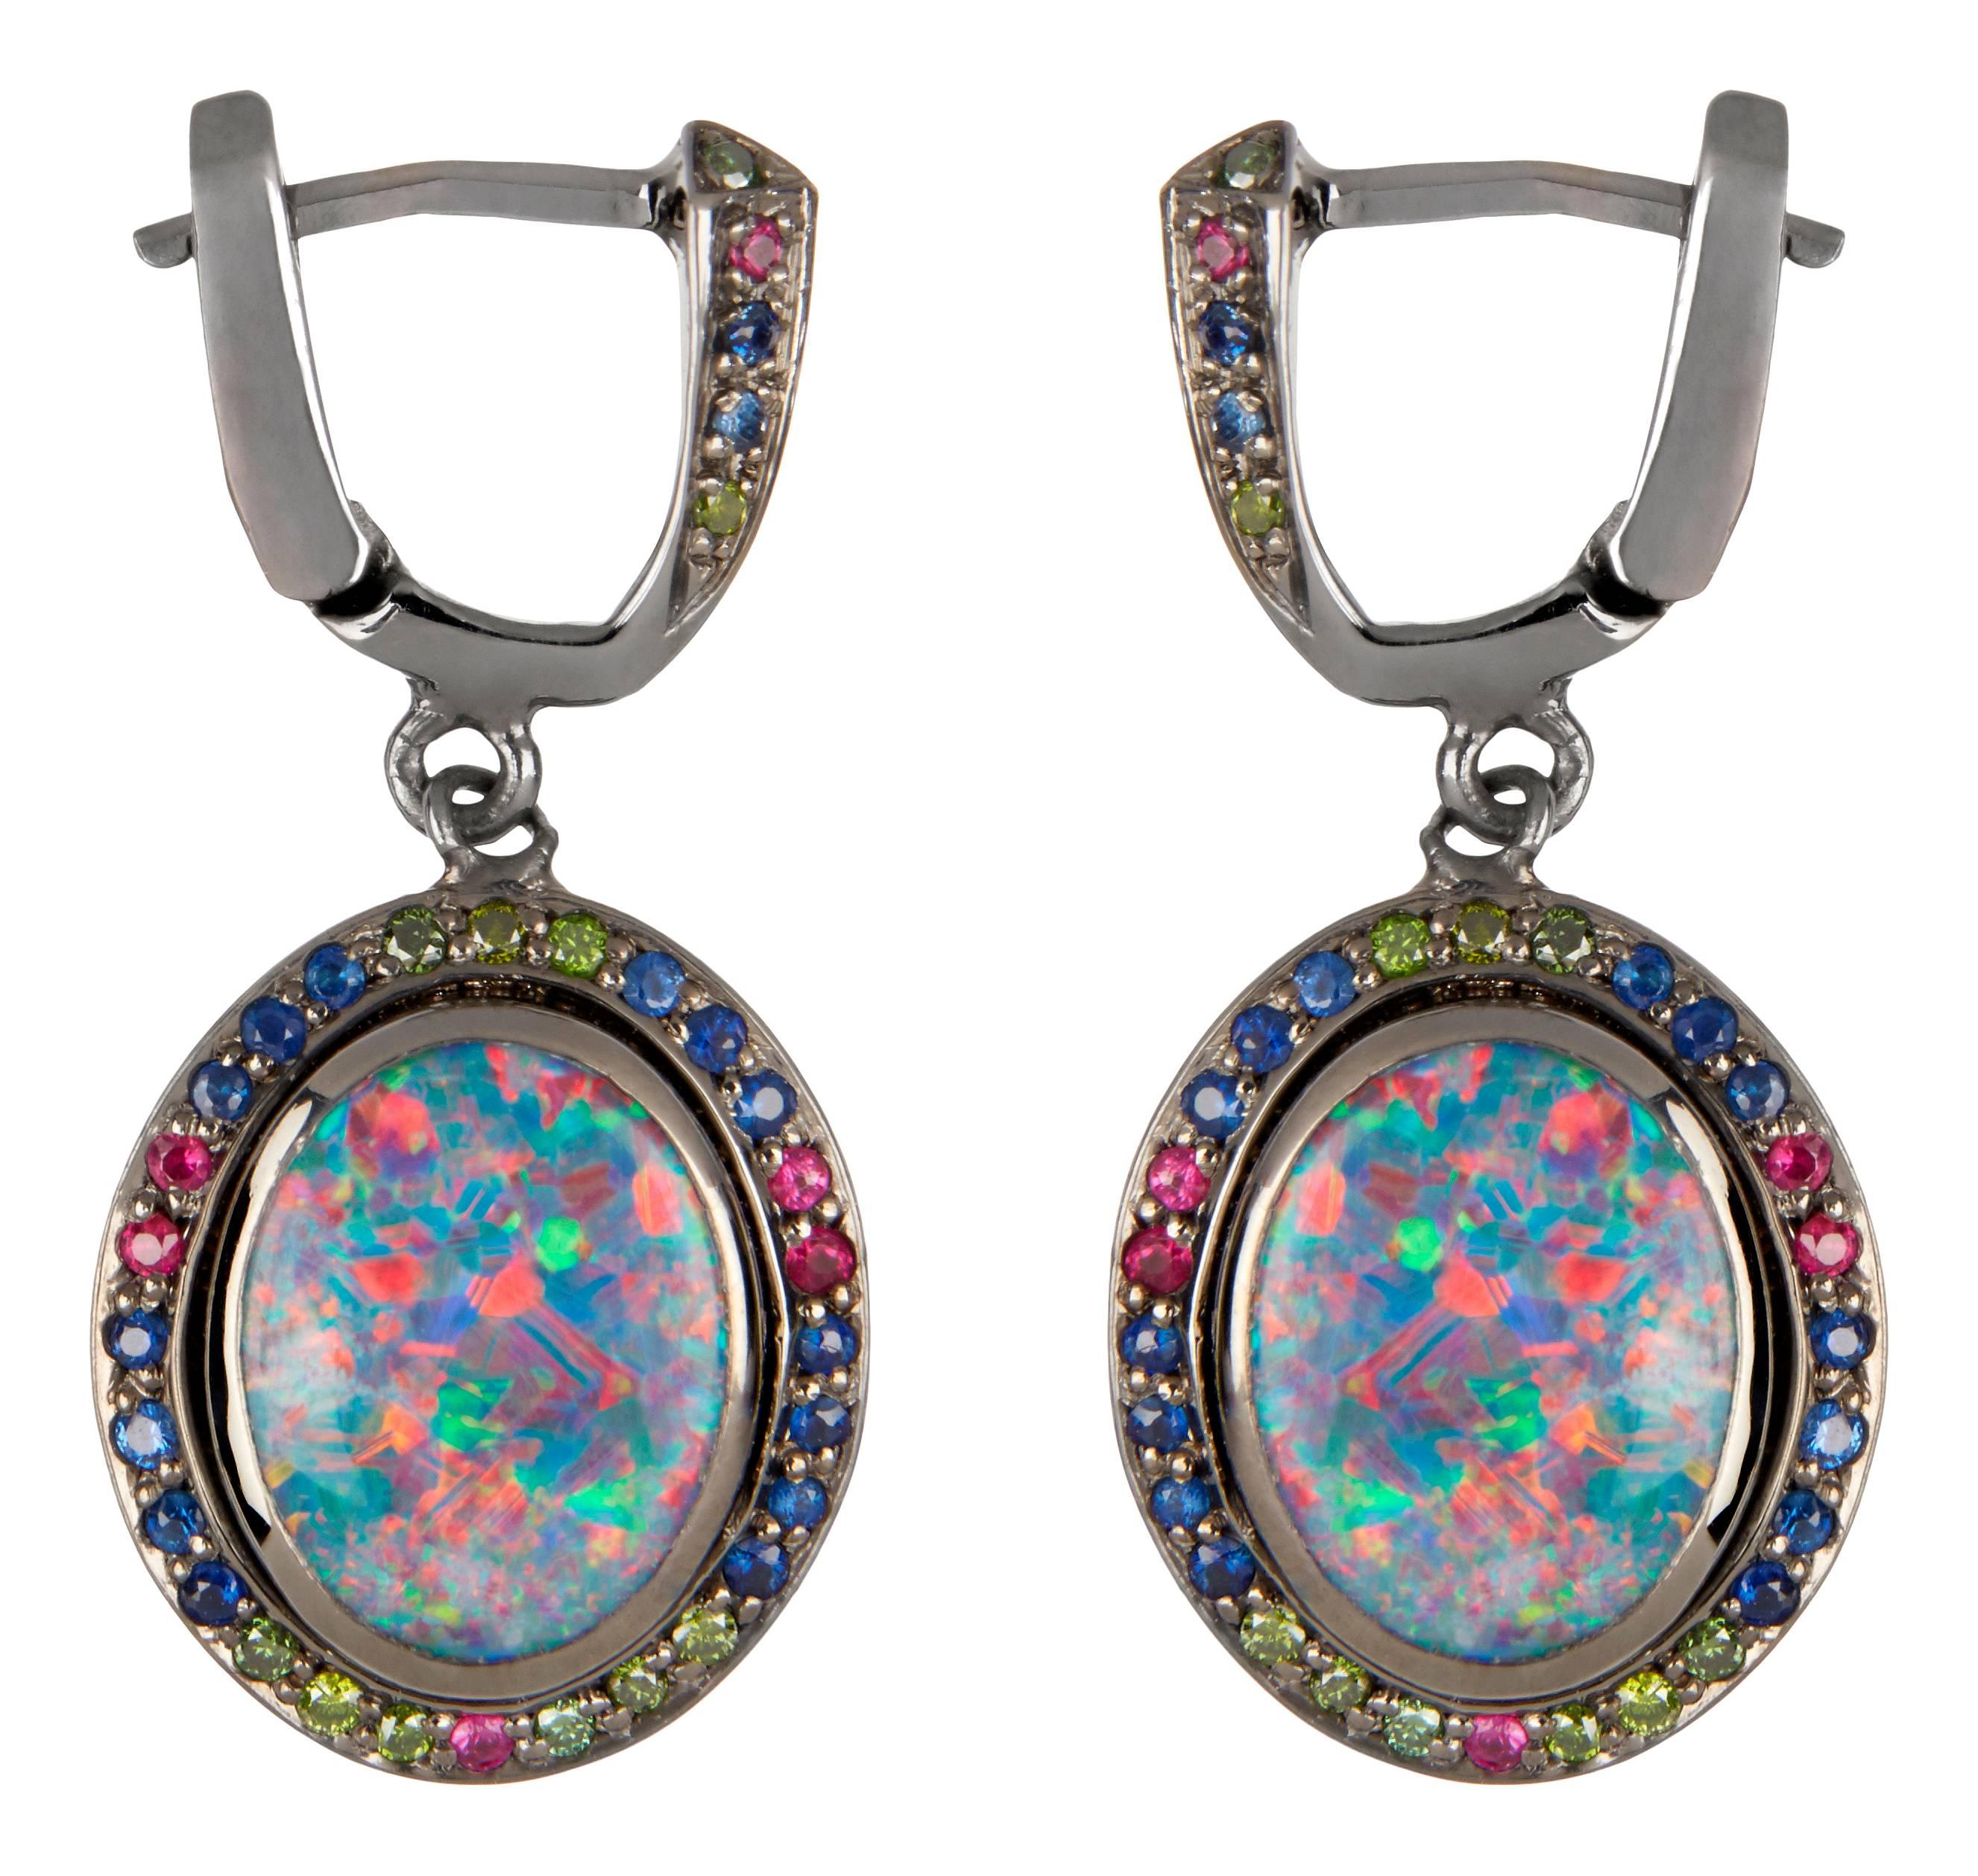 *MADE TO ORDER - 5 WEEKS LEAD TIME*

9ct blackened white gold earrings set with 10 x 8mm black opal inlays and 0.38ct sapphires, 0.22ct green diamonds and 0.14ct rubies.